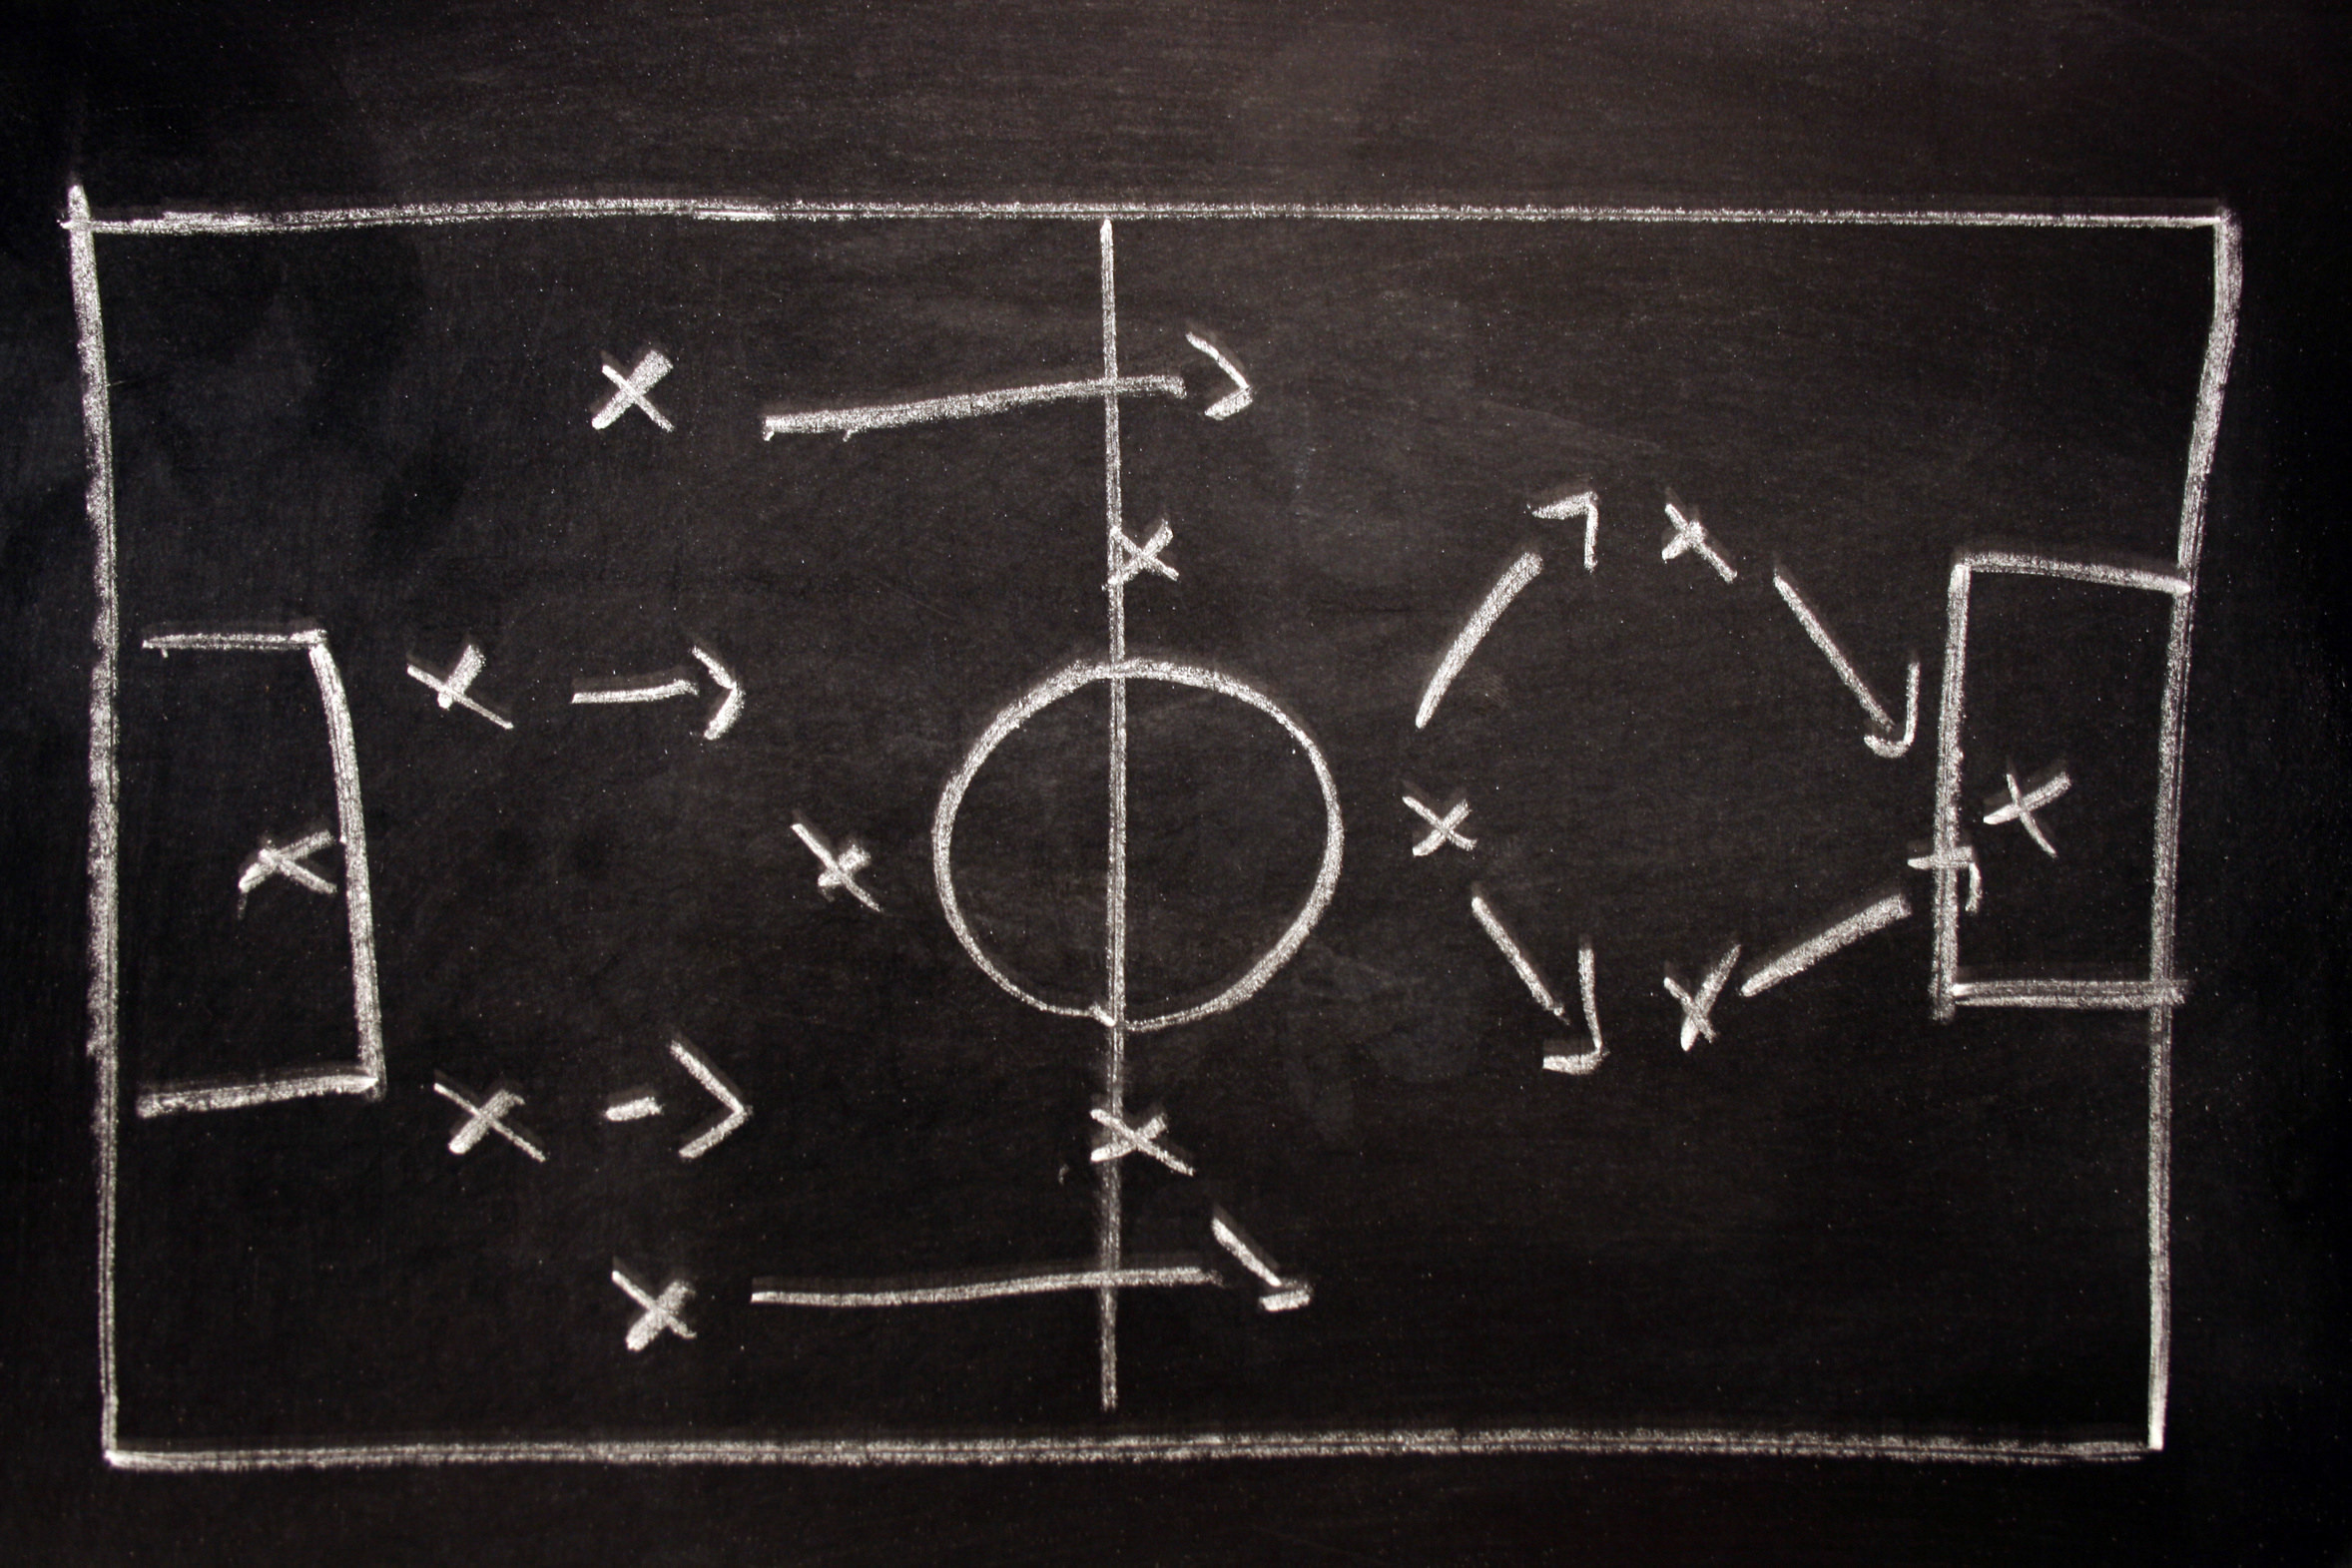 A soccer Tactical Analysis board